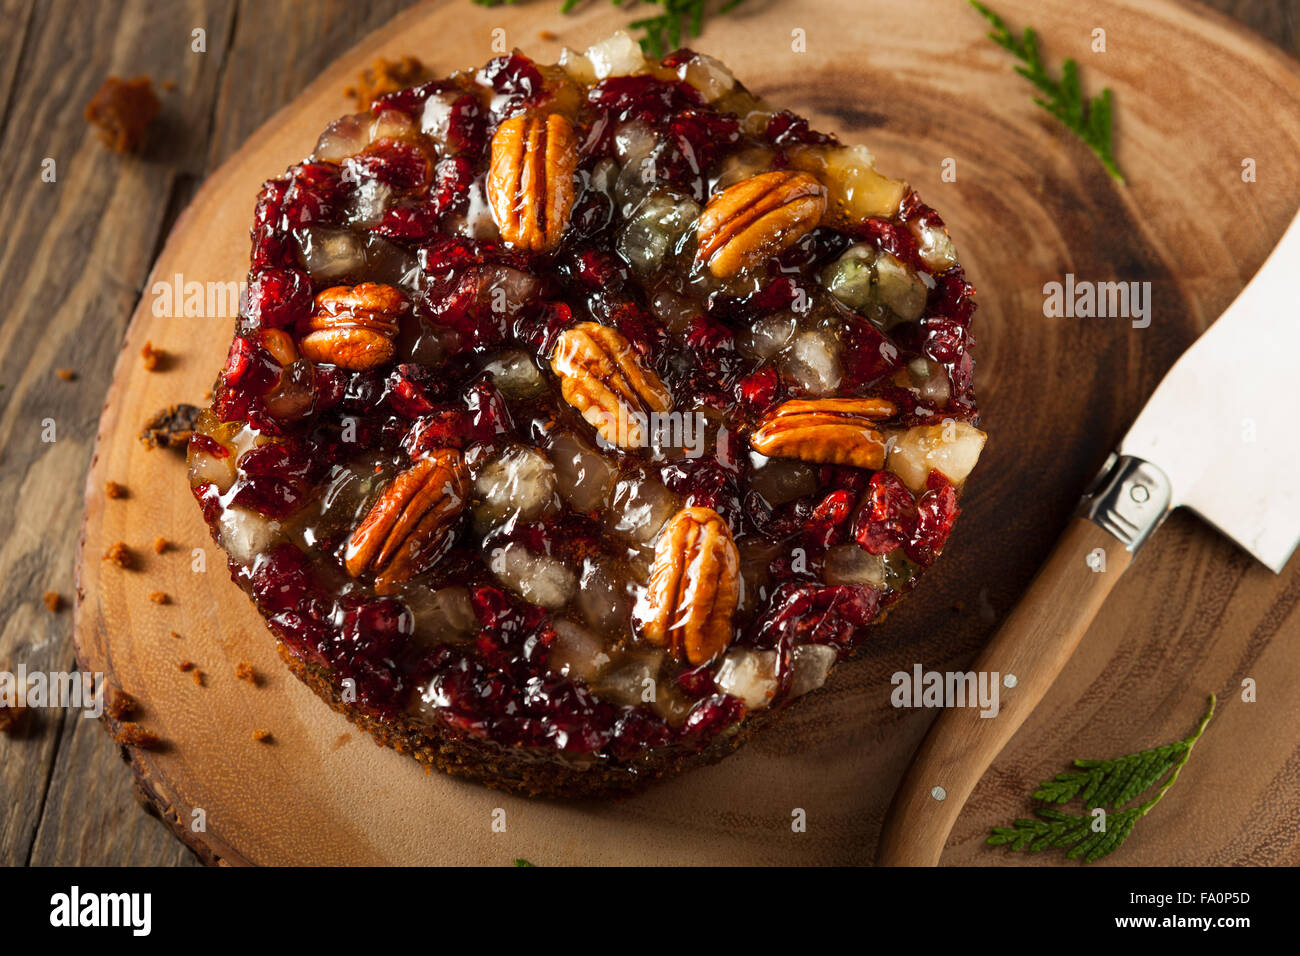 Festive Holiday Fruit Cake with Nuts and Berries Stock Photo